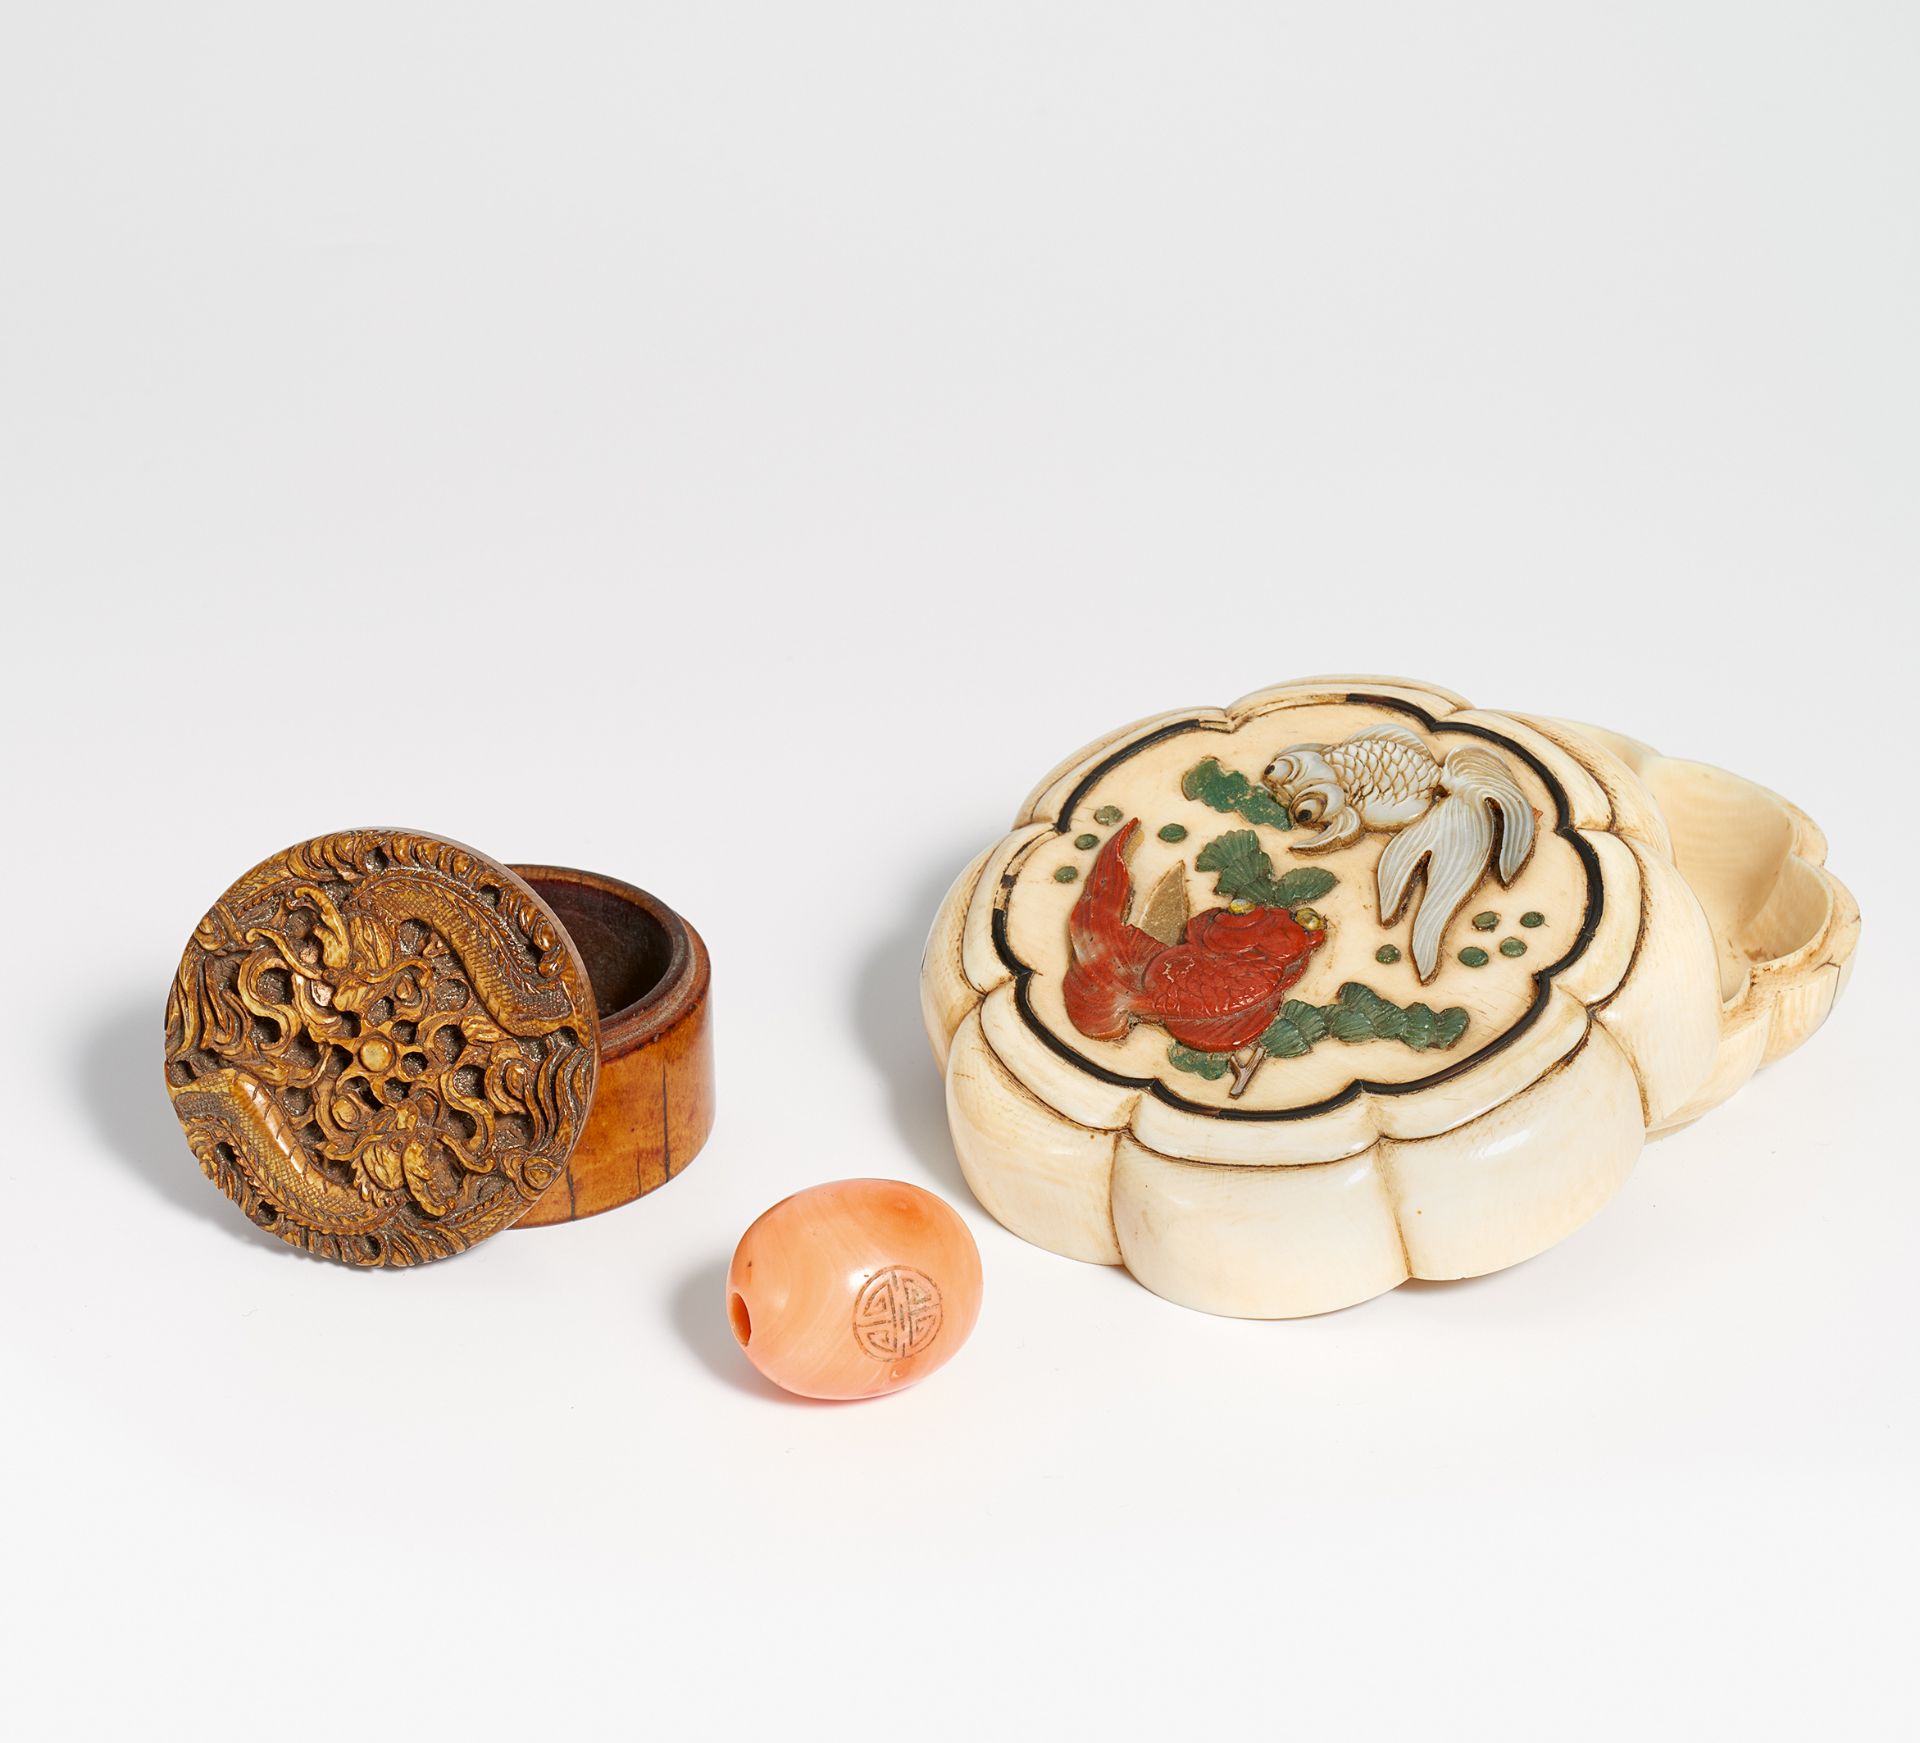 TWO IVORY LIDDED BOXED. China. 19th c. or earlier. a) Flower shaped lidded box with gold fish. - Image 2 of 2